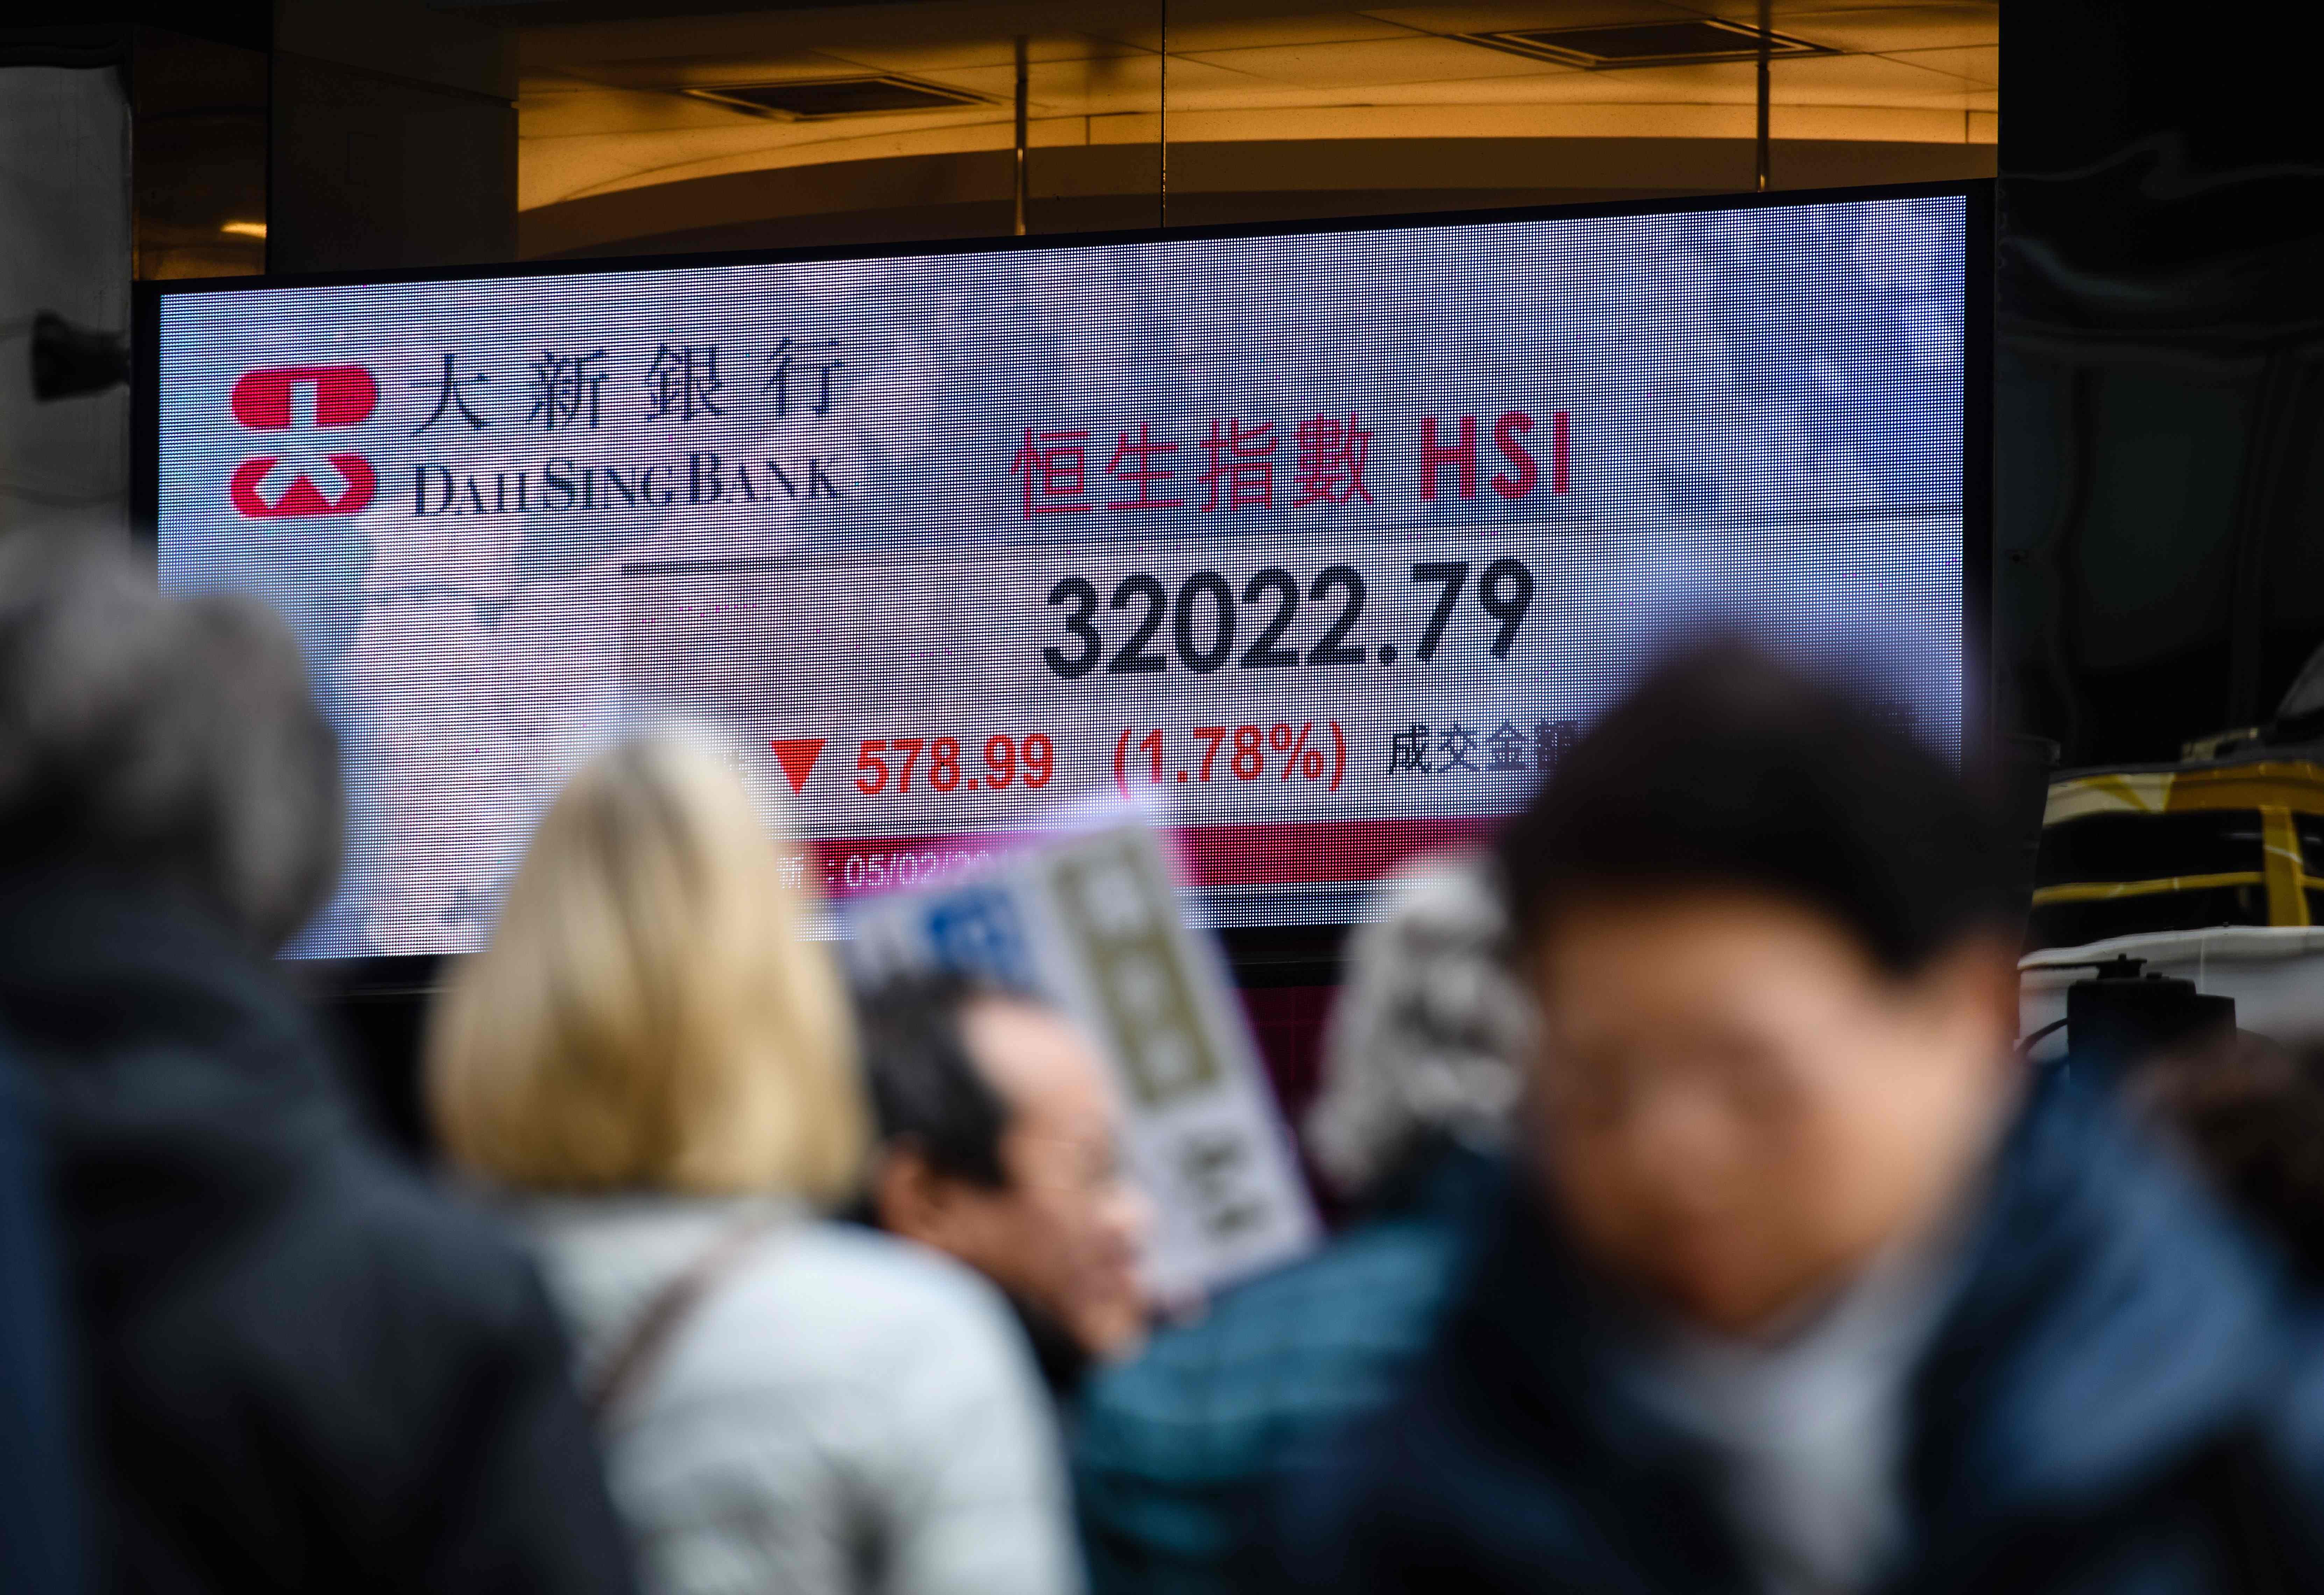 Hong Kong stocks are overvalued and poised for a correction, writes Henry Chan. Photo: AFP